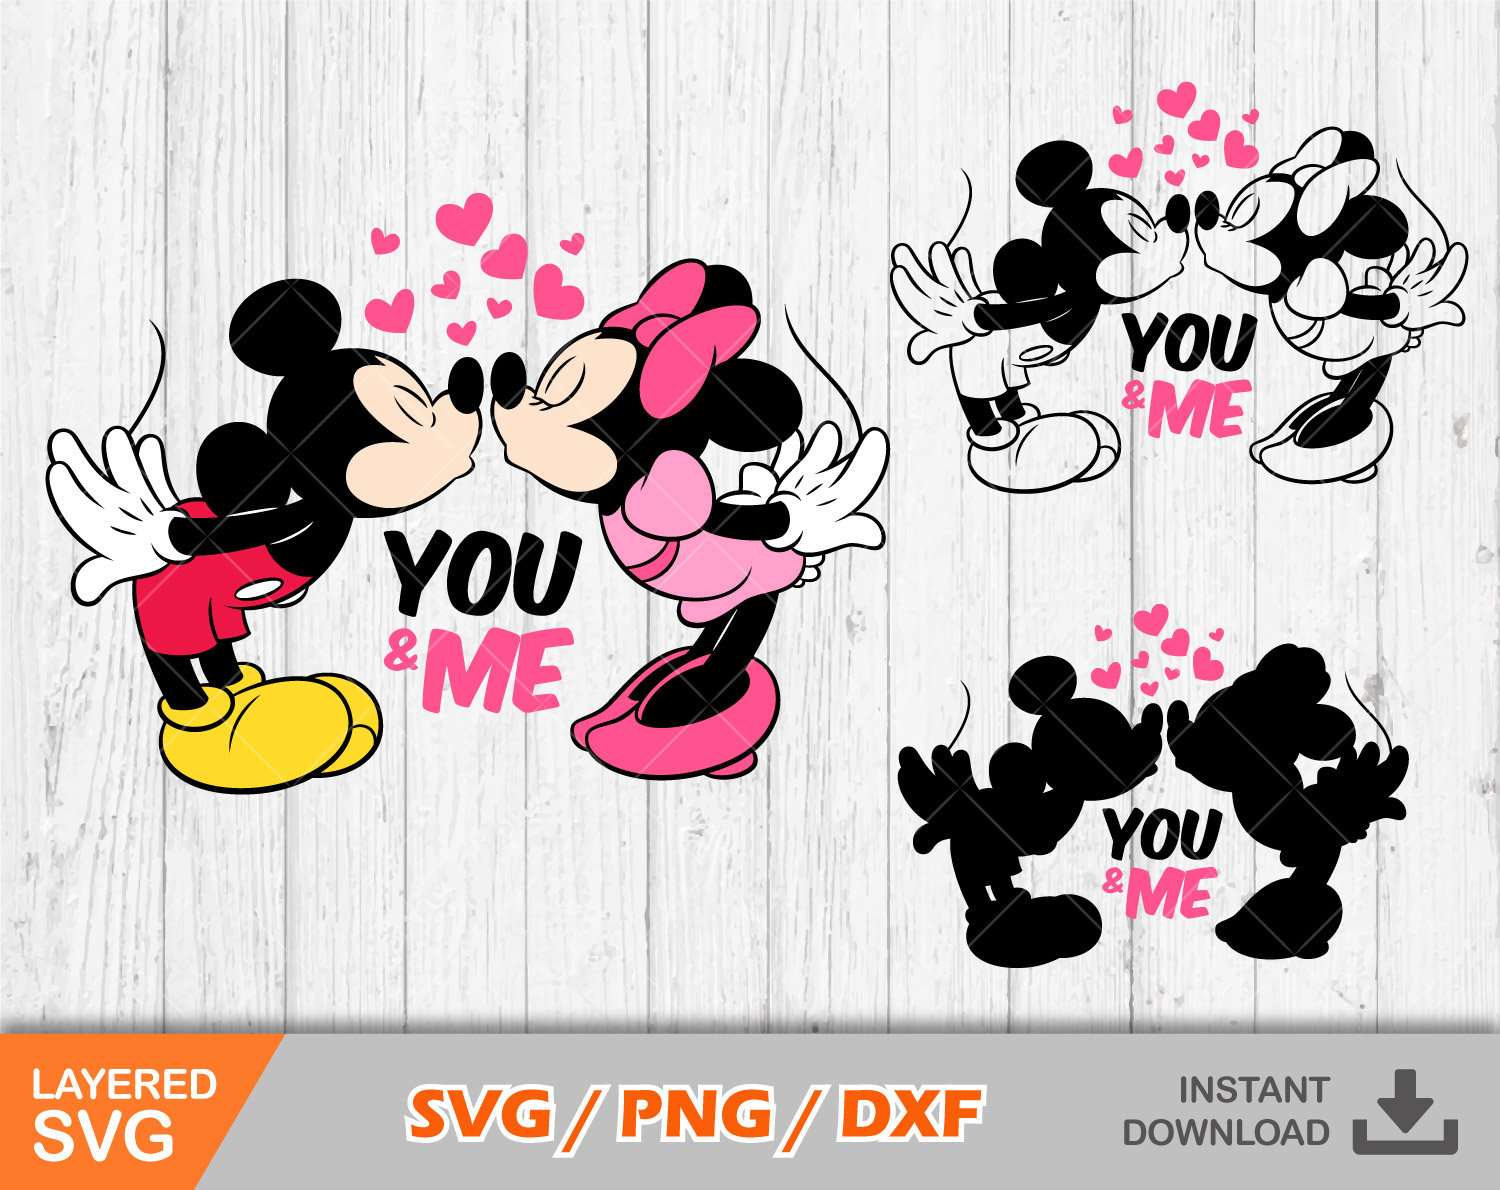 Mickey and Minnie,Mickey & Minnie couple, Mickey and Minnie sitting Mouse  Digital Download, pdf png svg, dxf, Cricut, Silhouette Cut File